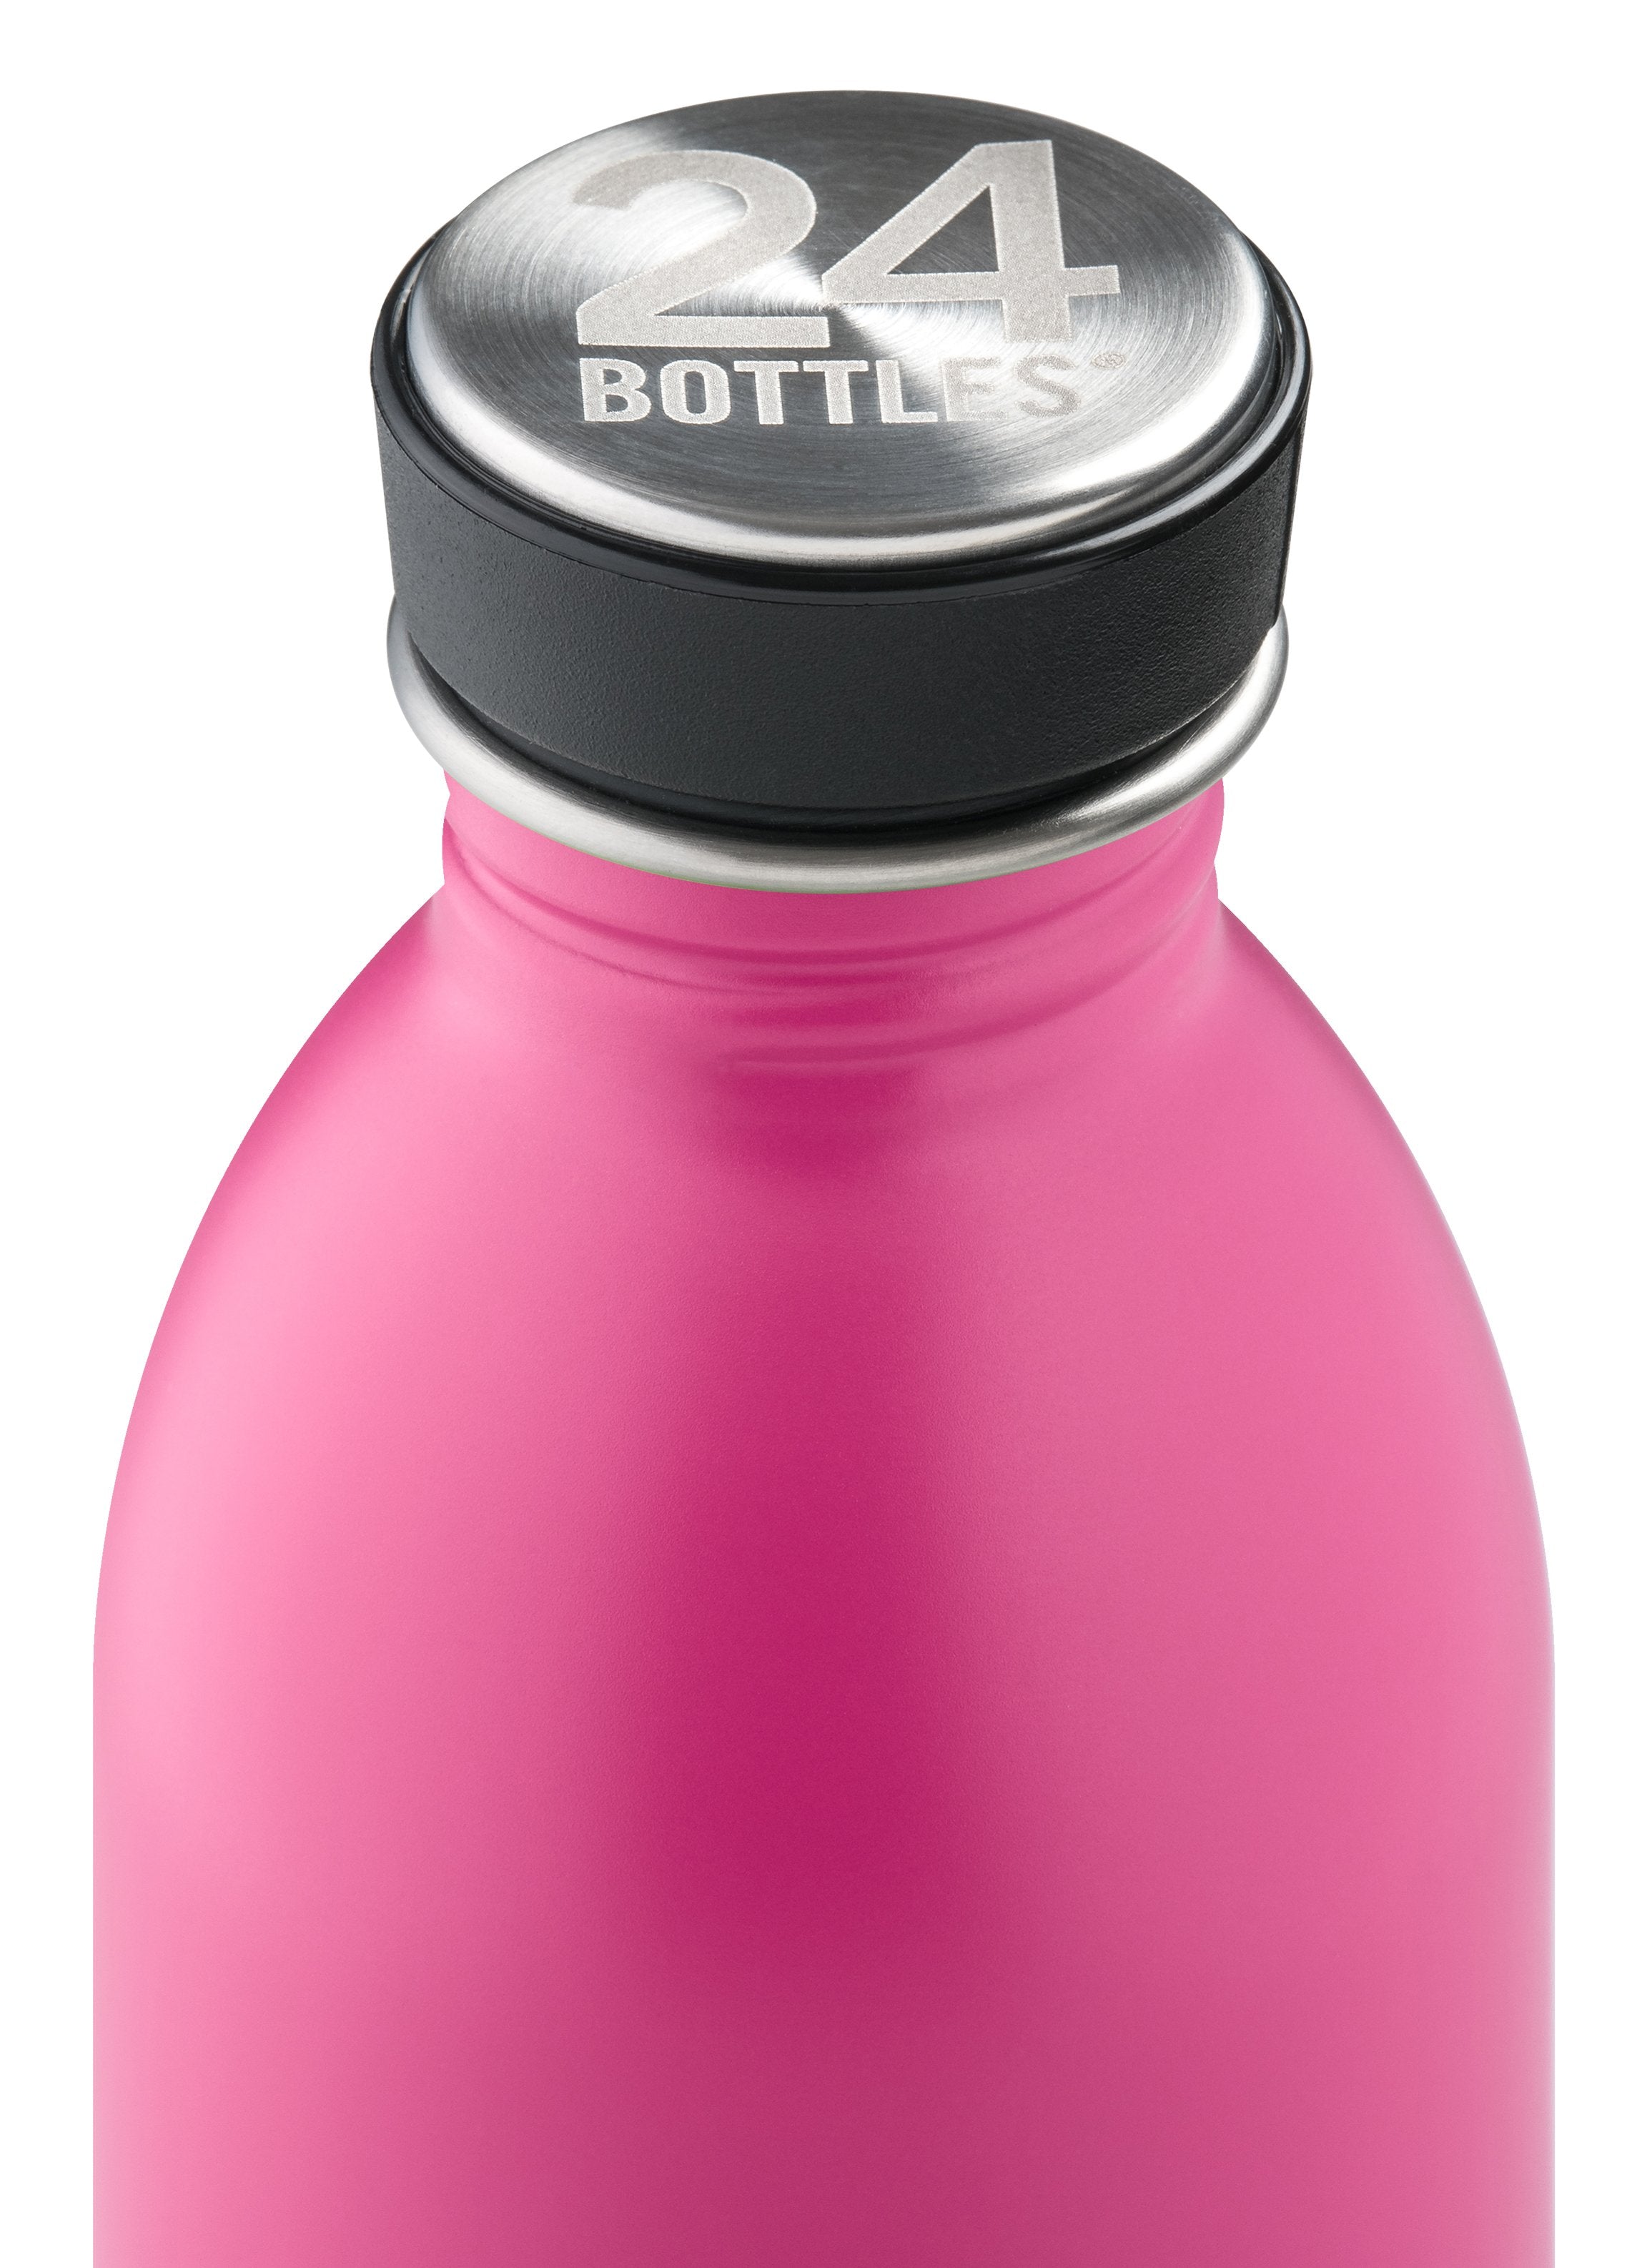 24Bottles URBAN Bottle (500ml) Lightest Insulated Stainless Steel Water Bottle, Eco-Friendly Reusable BPA-Free Hot Cold Modern, Portable, Leak Proof for Travel, Office, Home, Gym -  Passion Pink